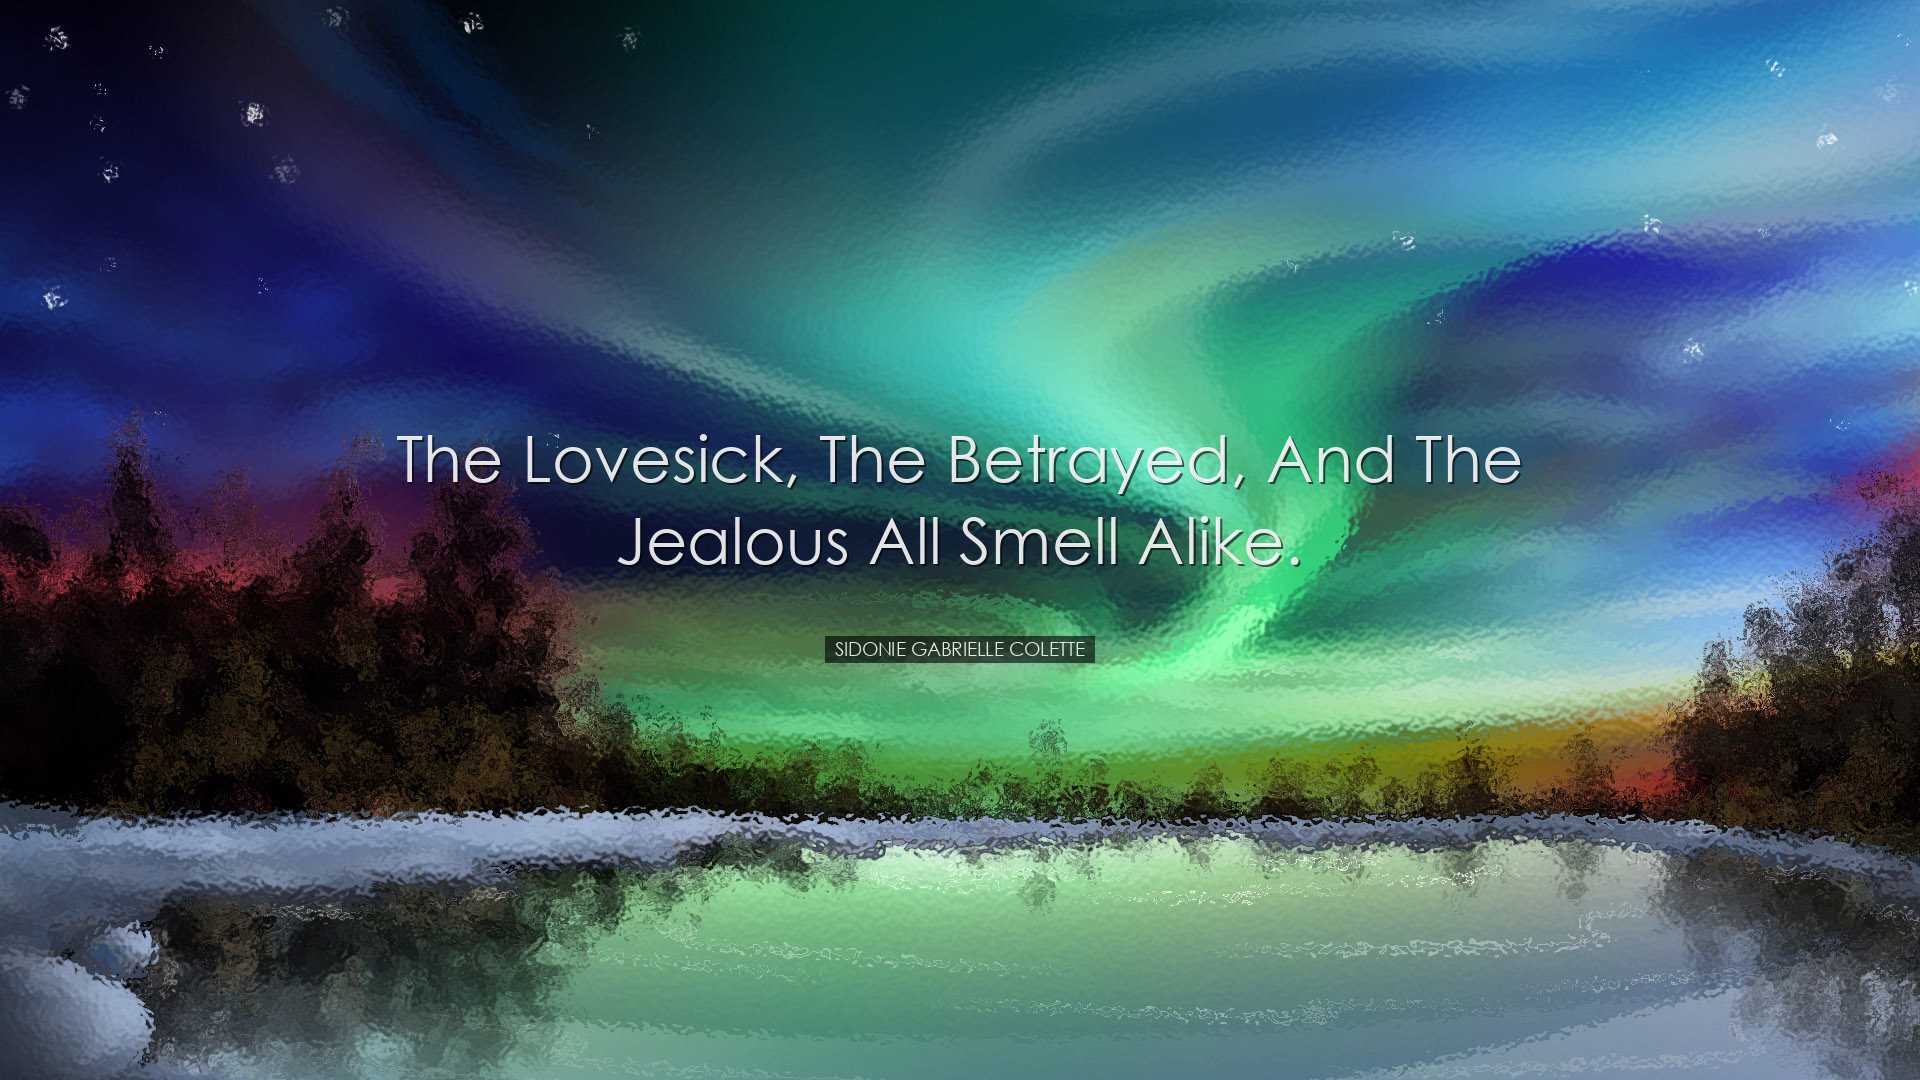 The lovesick, the betrayed, and the jealous all smell alike. - Sid